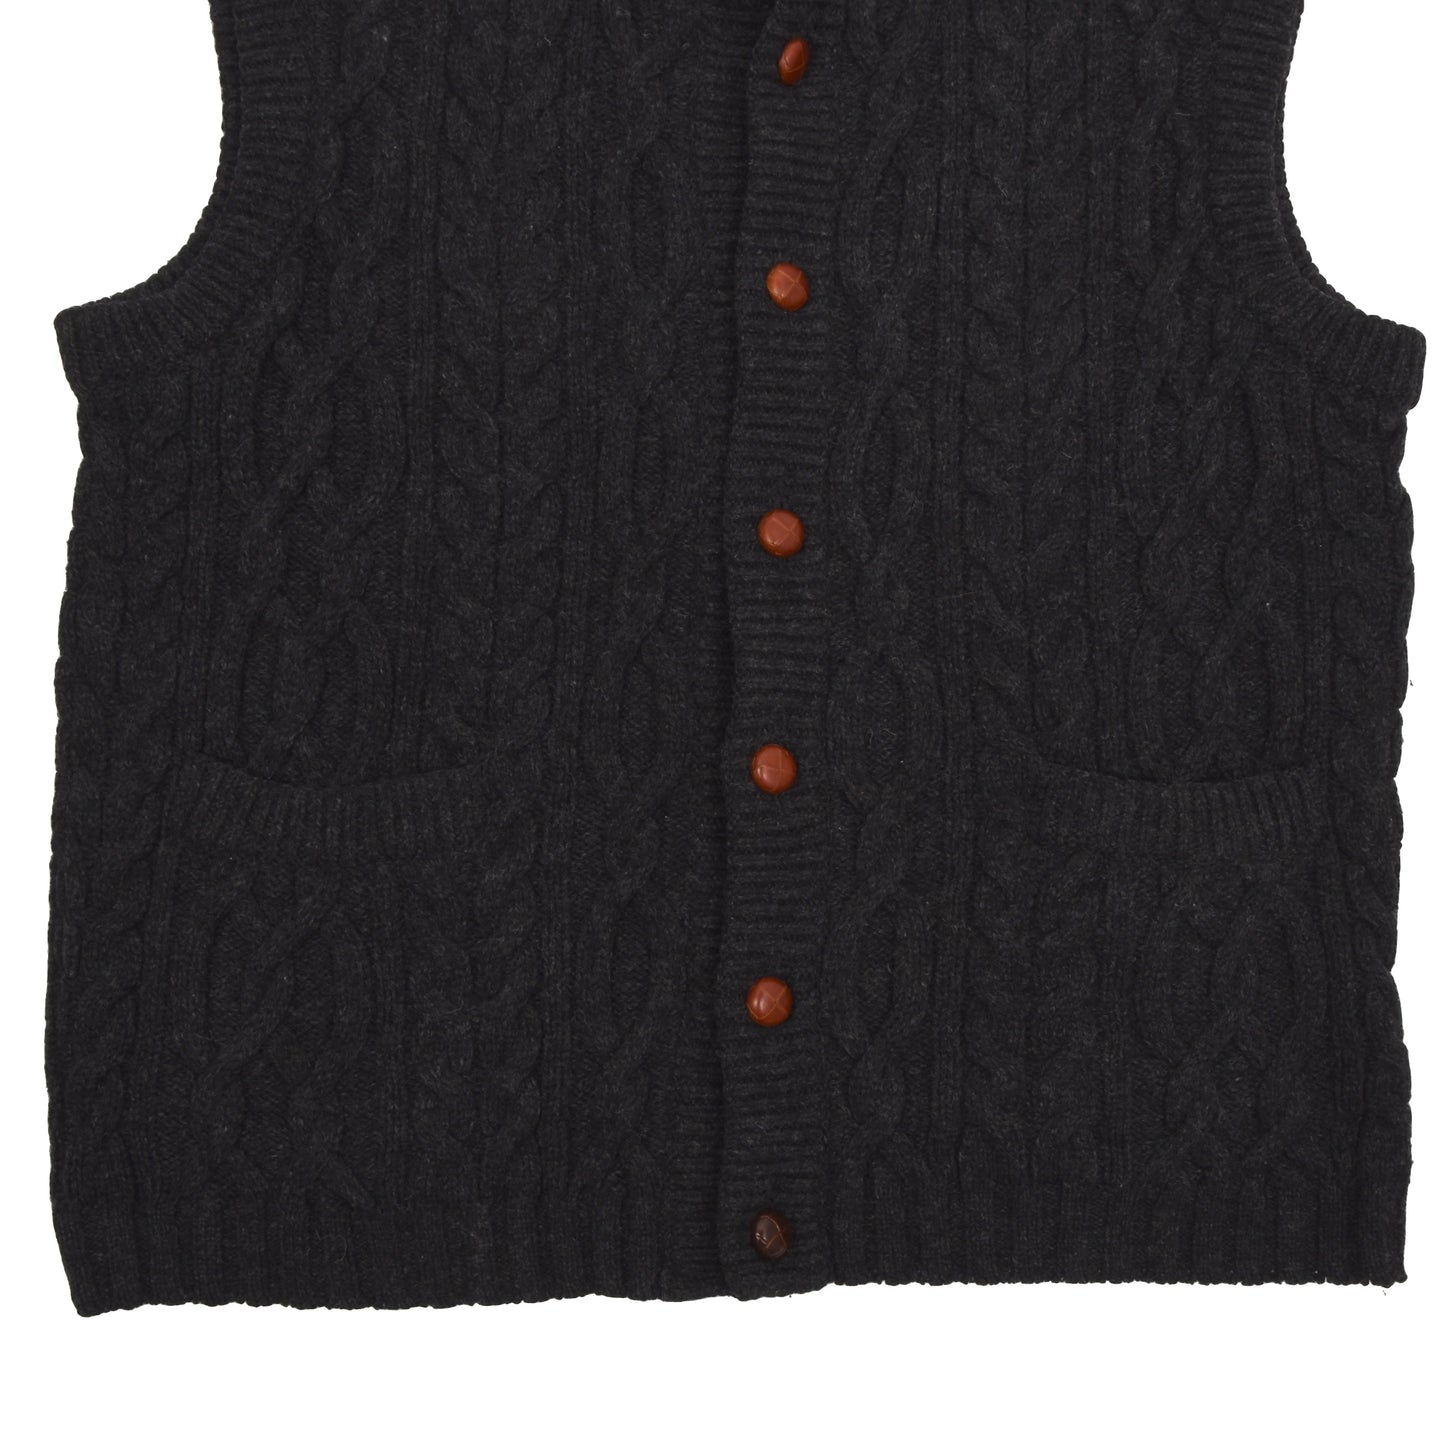 Vintage Moden Zach Cableknit Wool Sweater Vest - Charcoal